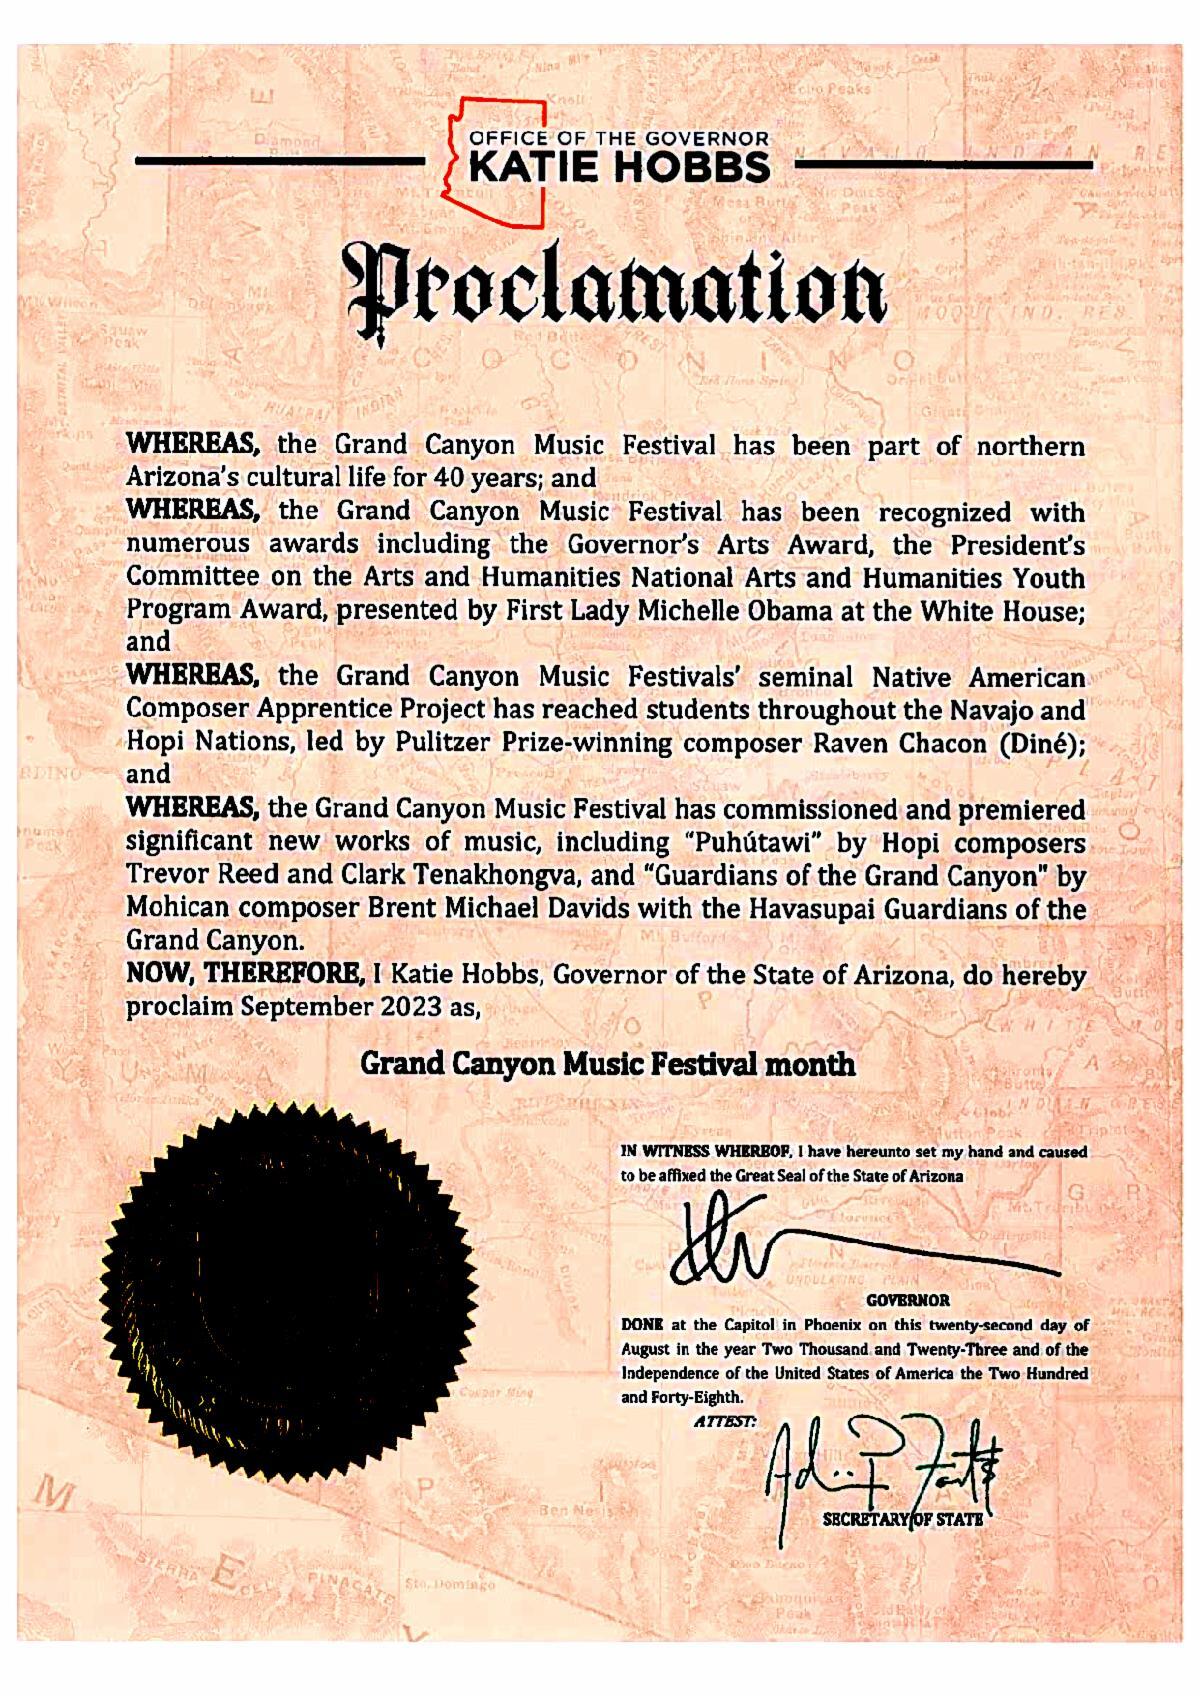 a proclamation from Arizona Governor Katie Hobbs